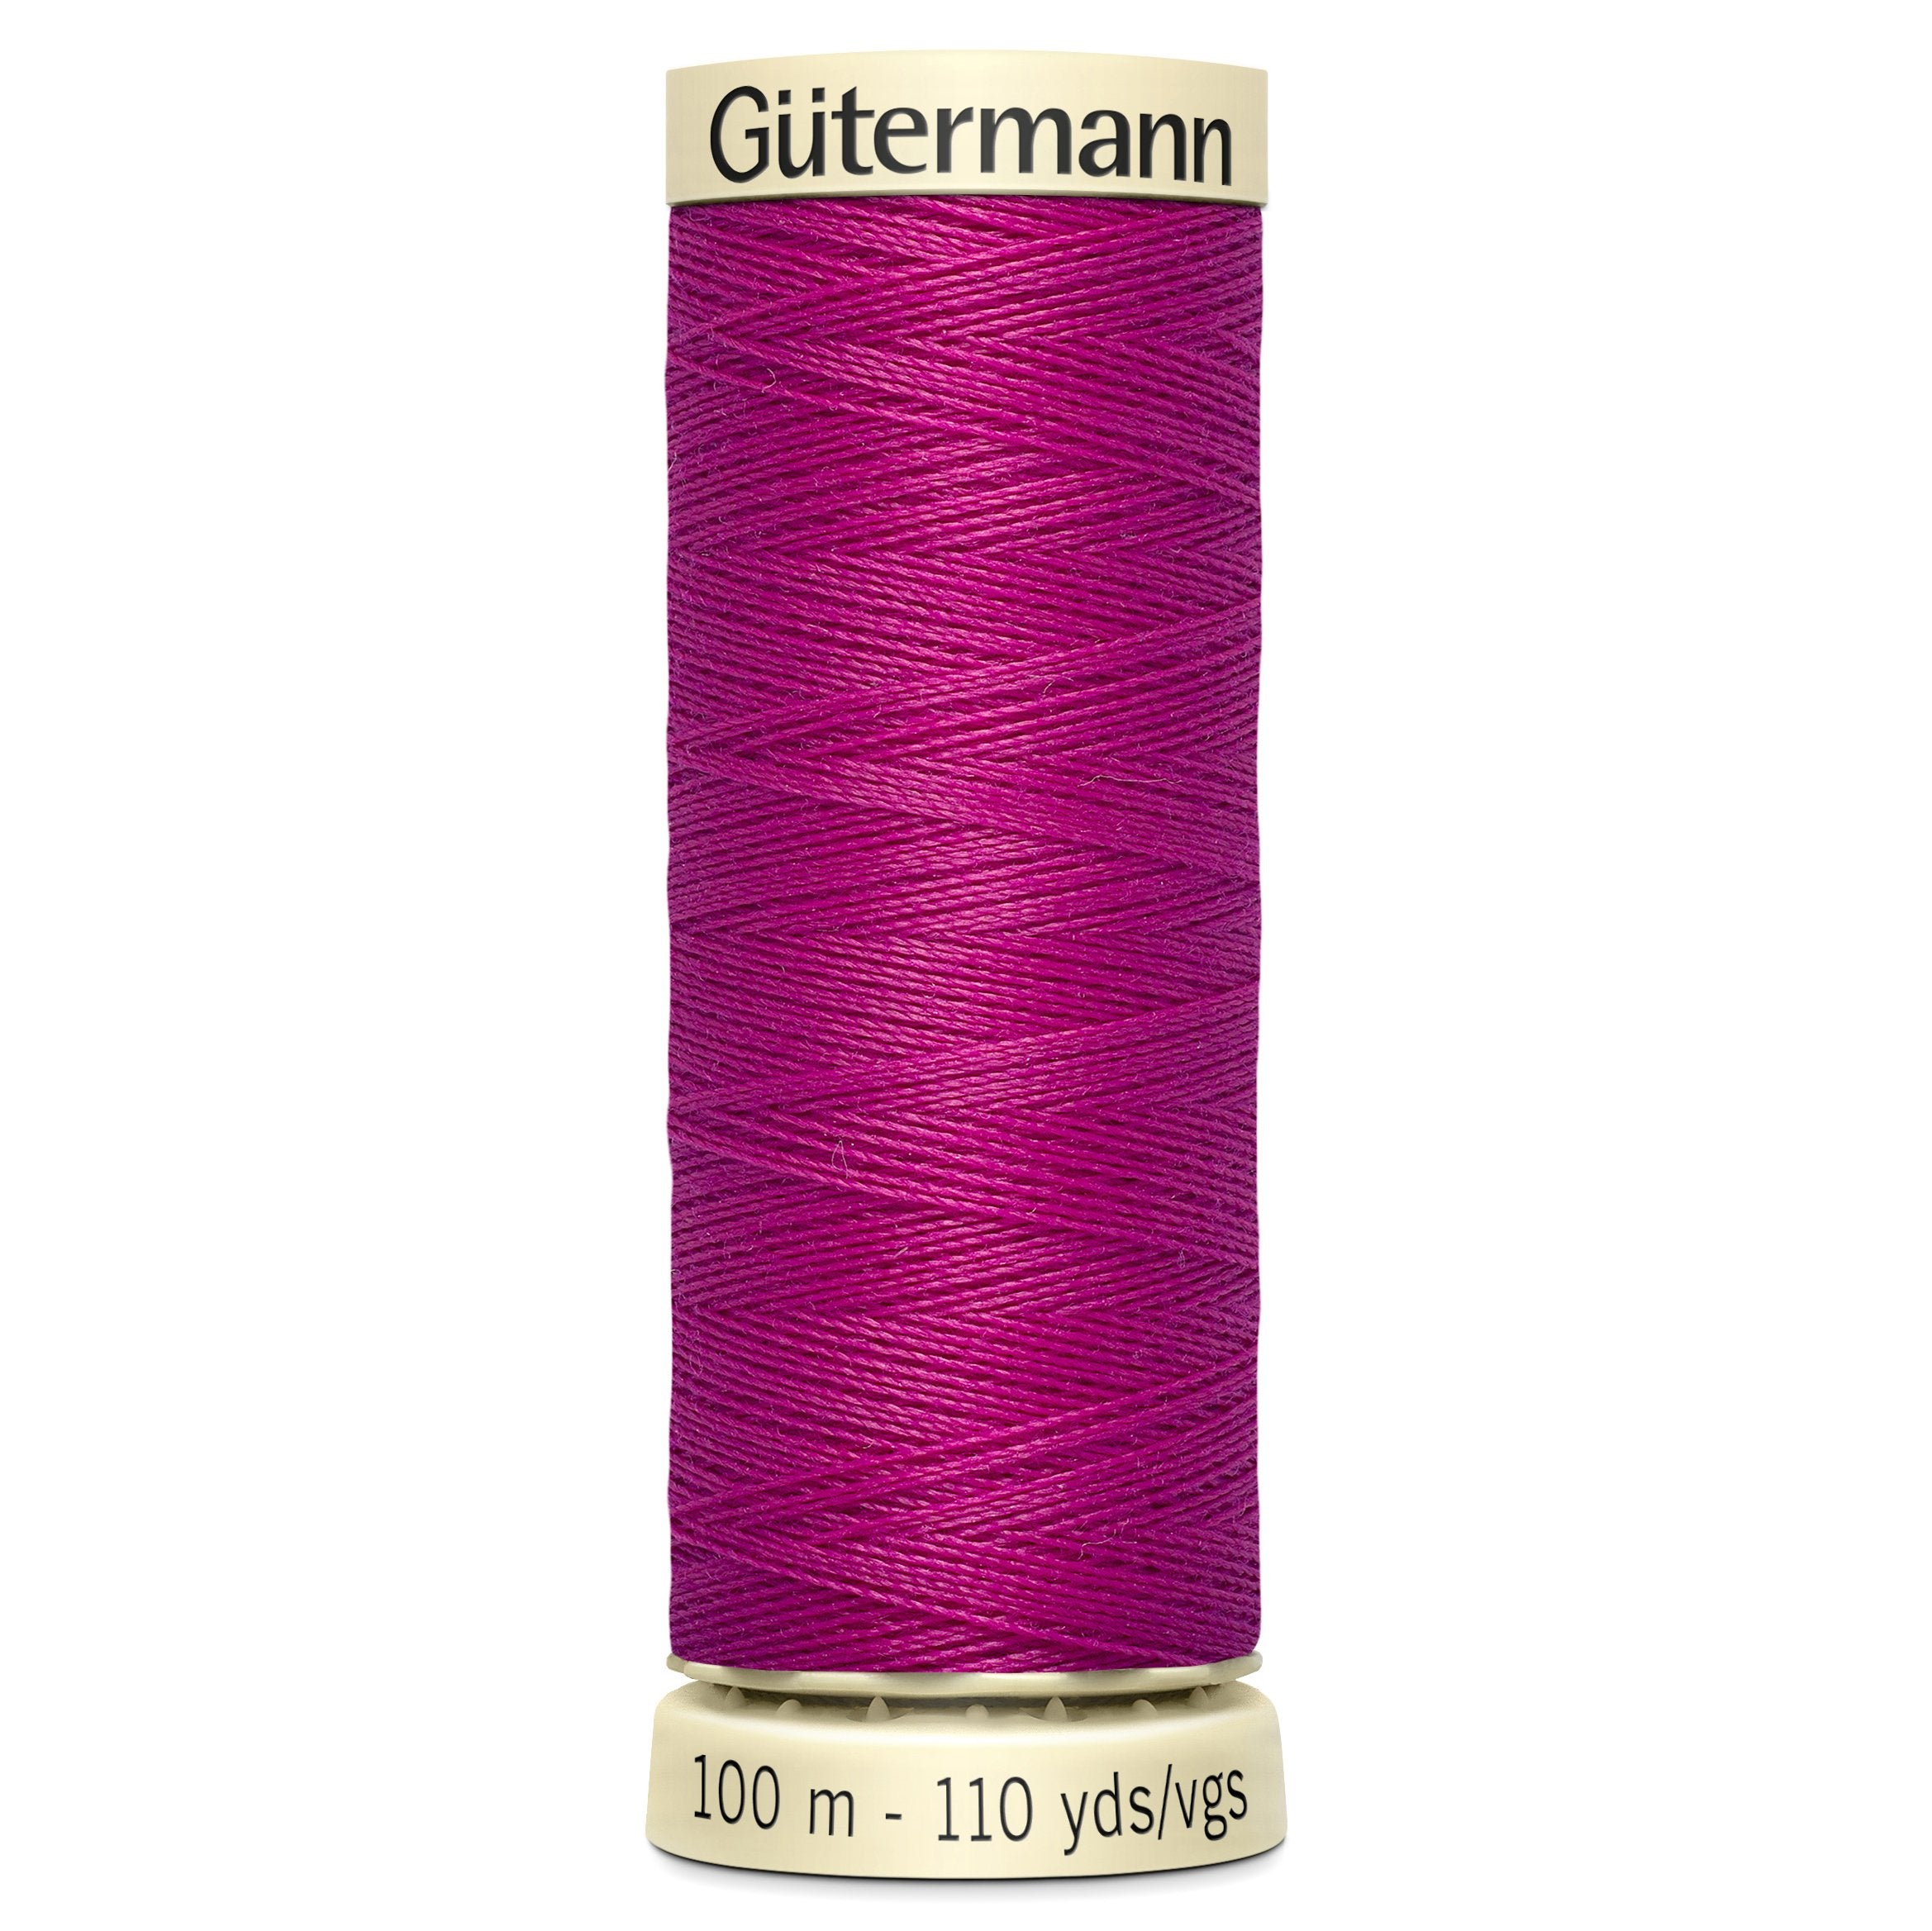 Gutermann Sew All Thread colour 877 Rose from Jaycotts Sewing Supplies